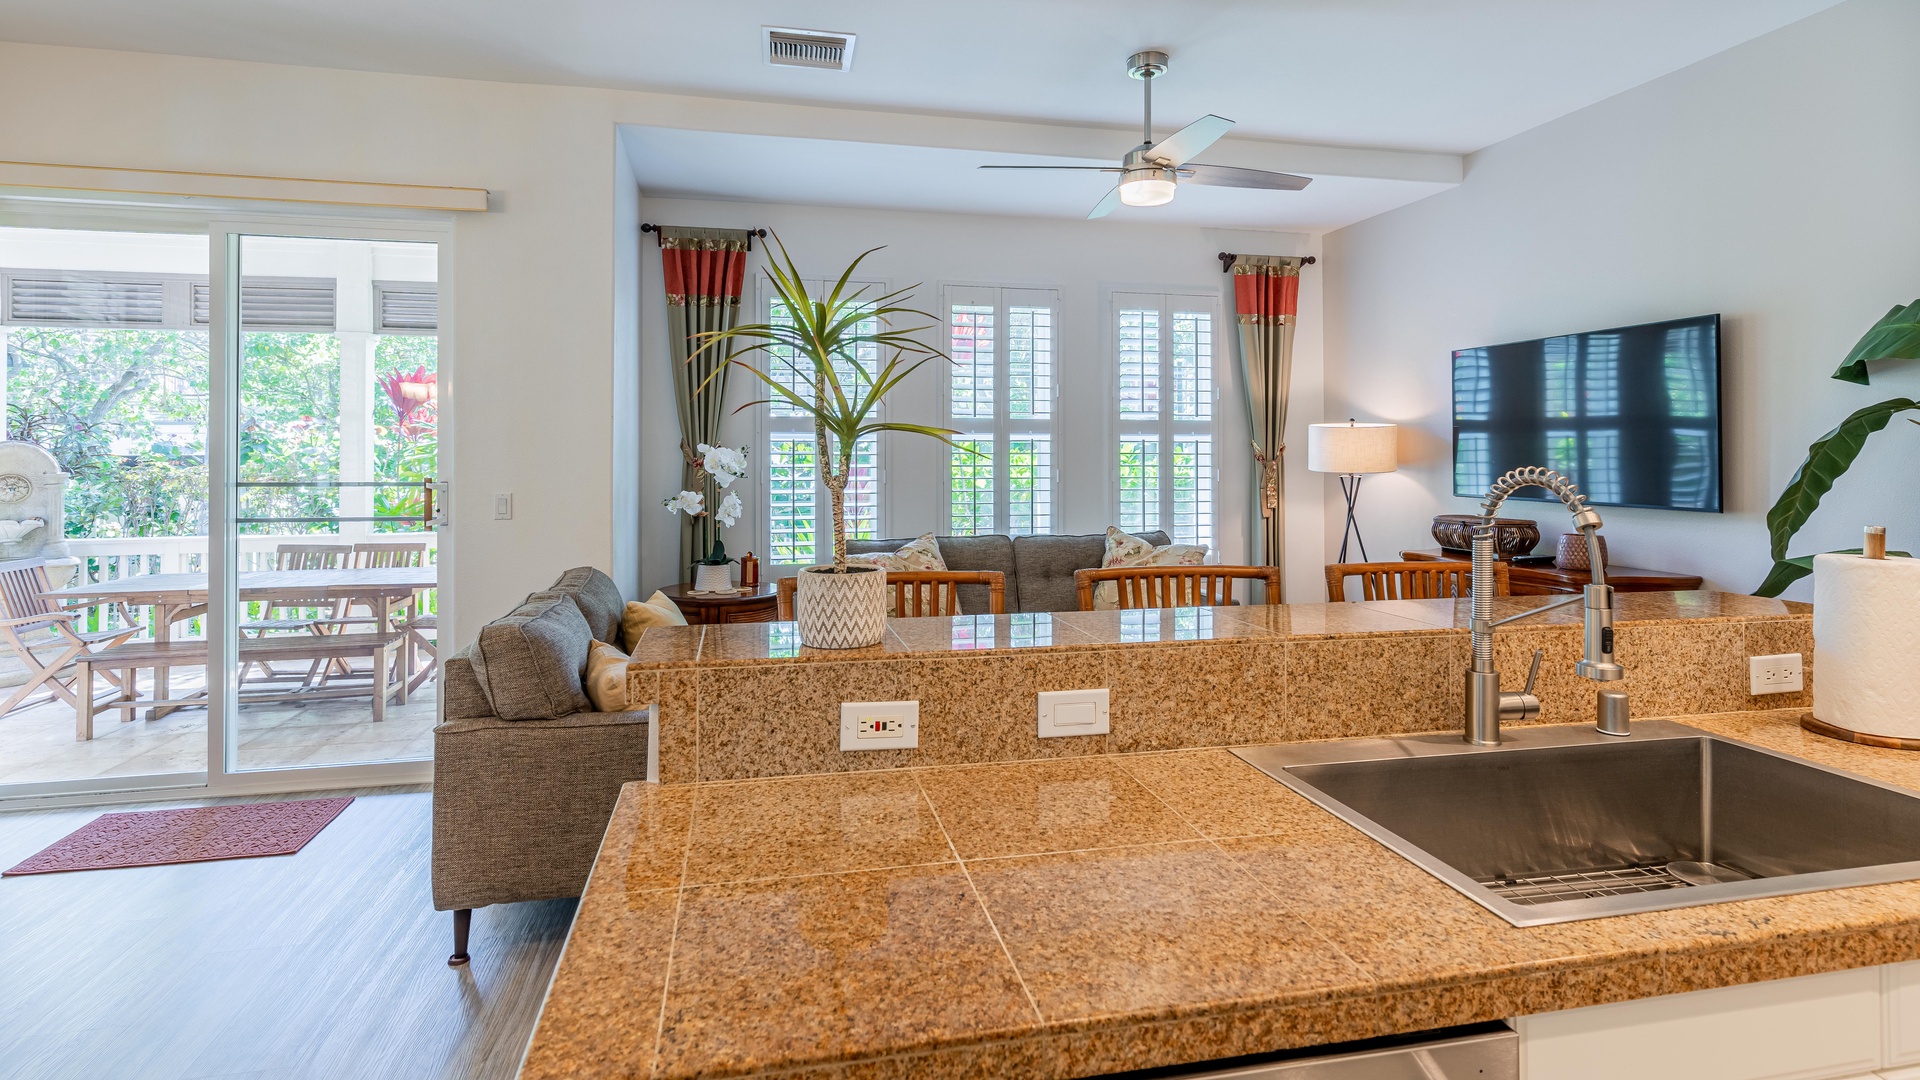 Kapolei Vacation Rentals, Coconut Plantation 1074-1 - Expansive space includes kitchen, dining and living areas.